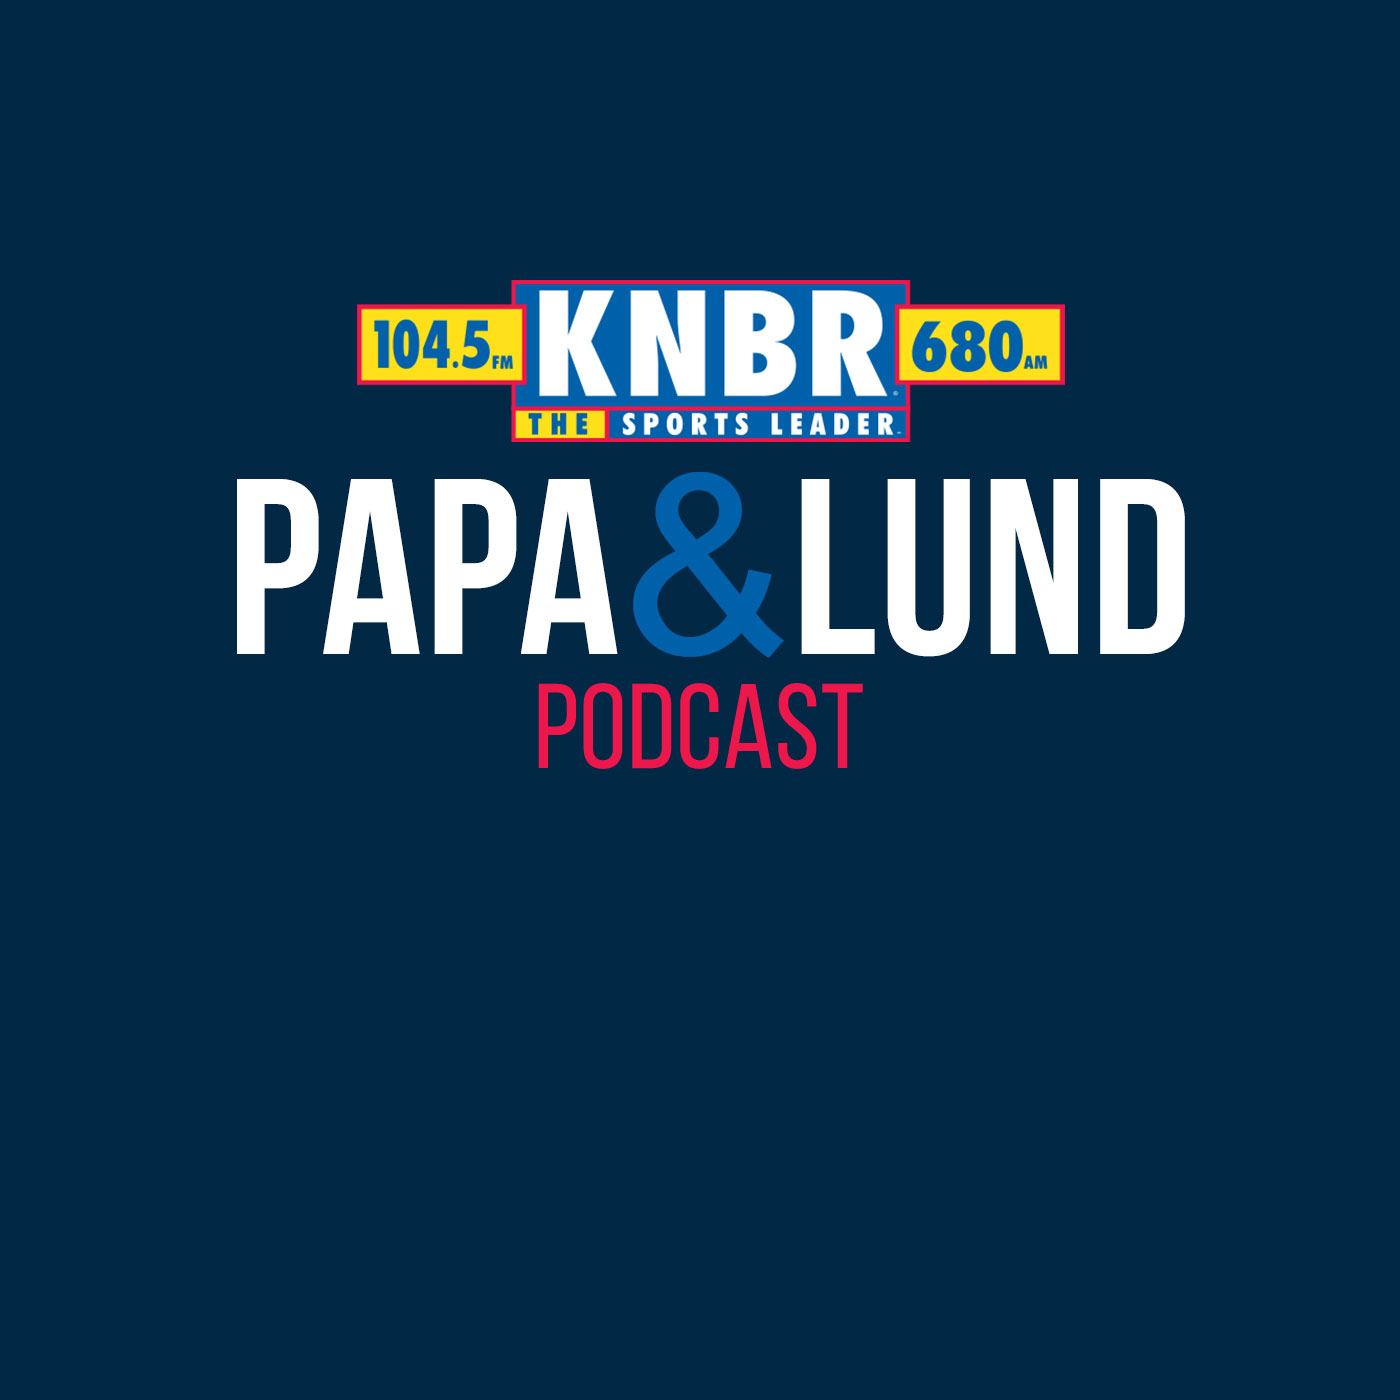 12-13 Eno Sarris joins Papa & Lund to discuss what Jung Hoo Lee adds to the Giants and breaks down some of the high profile arms remaining in Free Agency and who the Giants may look to acquire